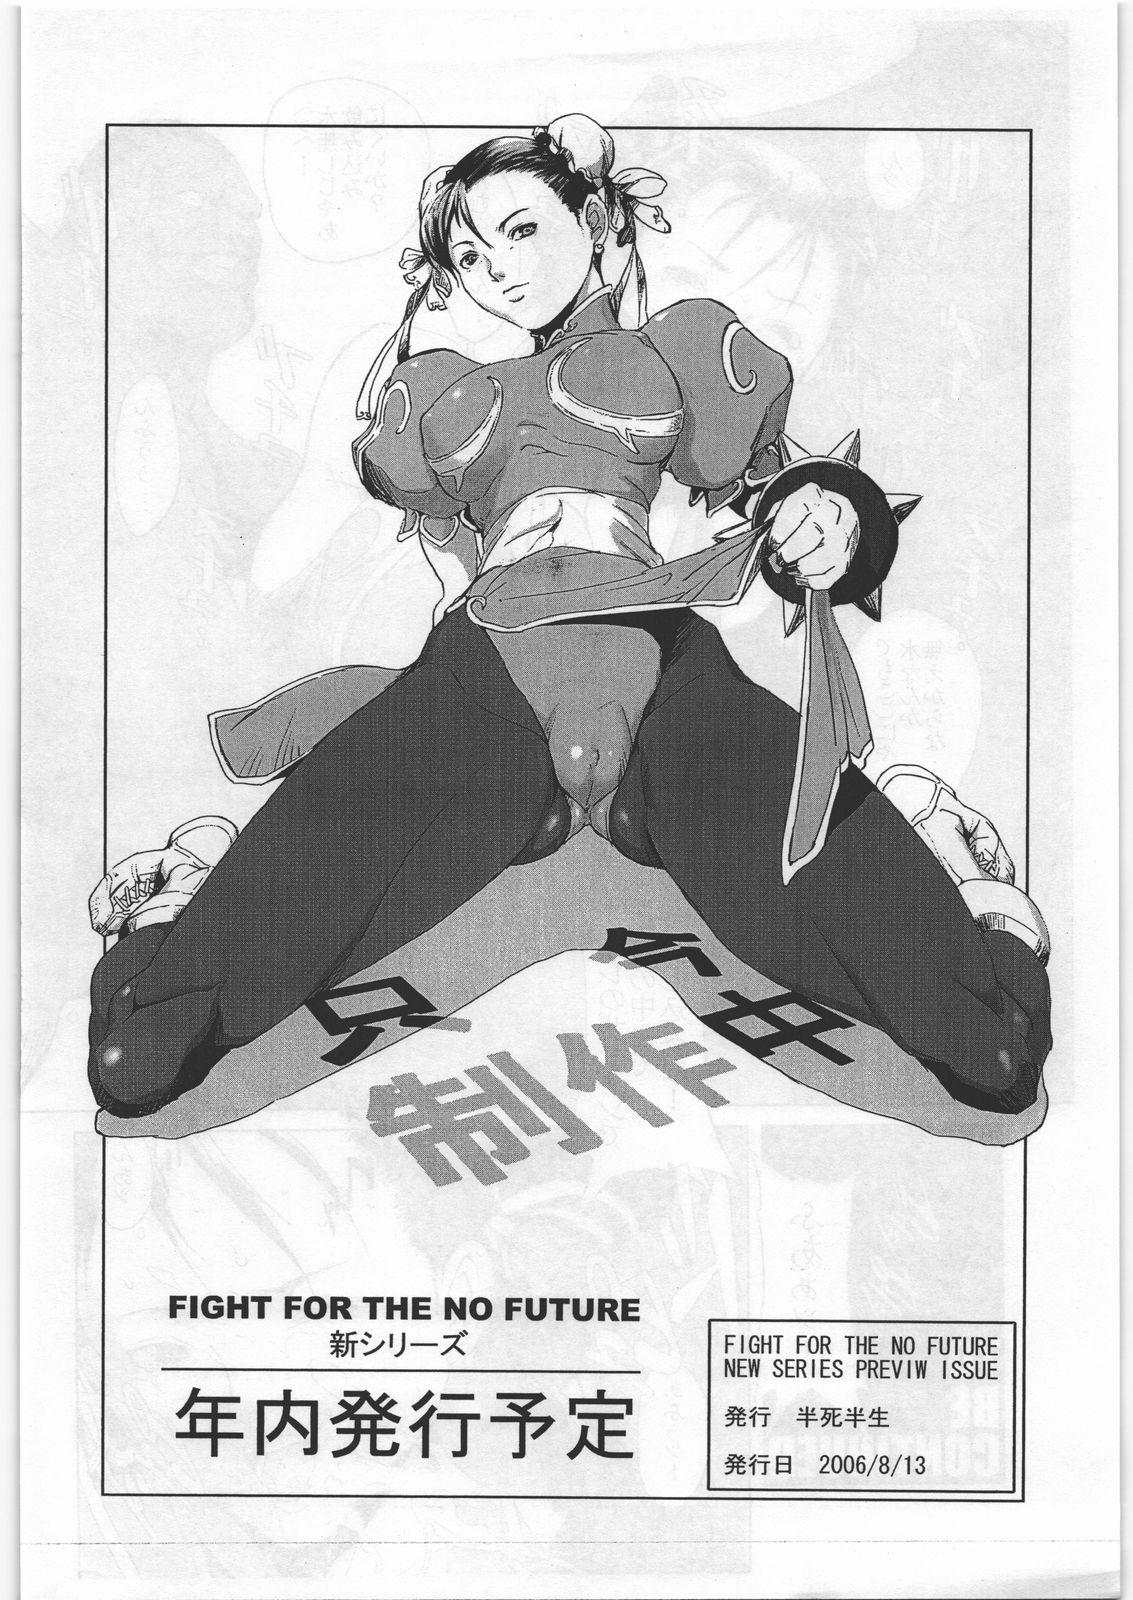 FIGHT FOR THE NO FUTURE NEW SERIES PREVIEW 9